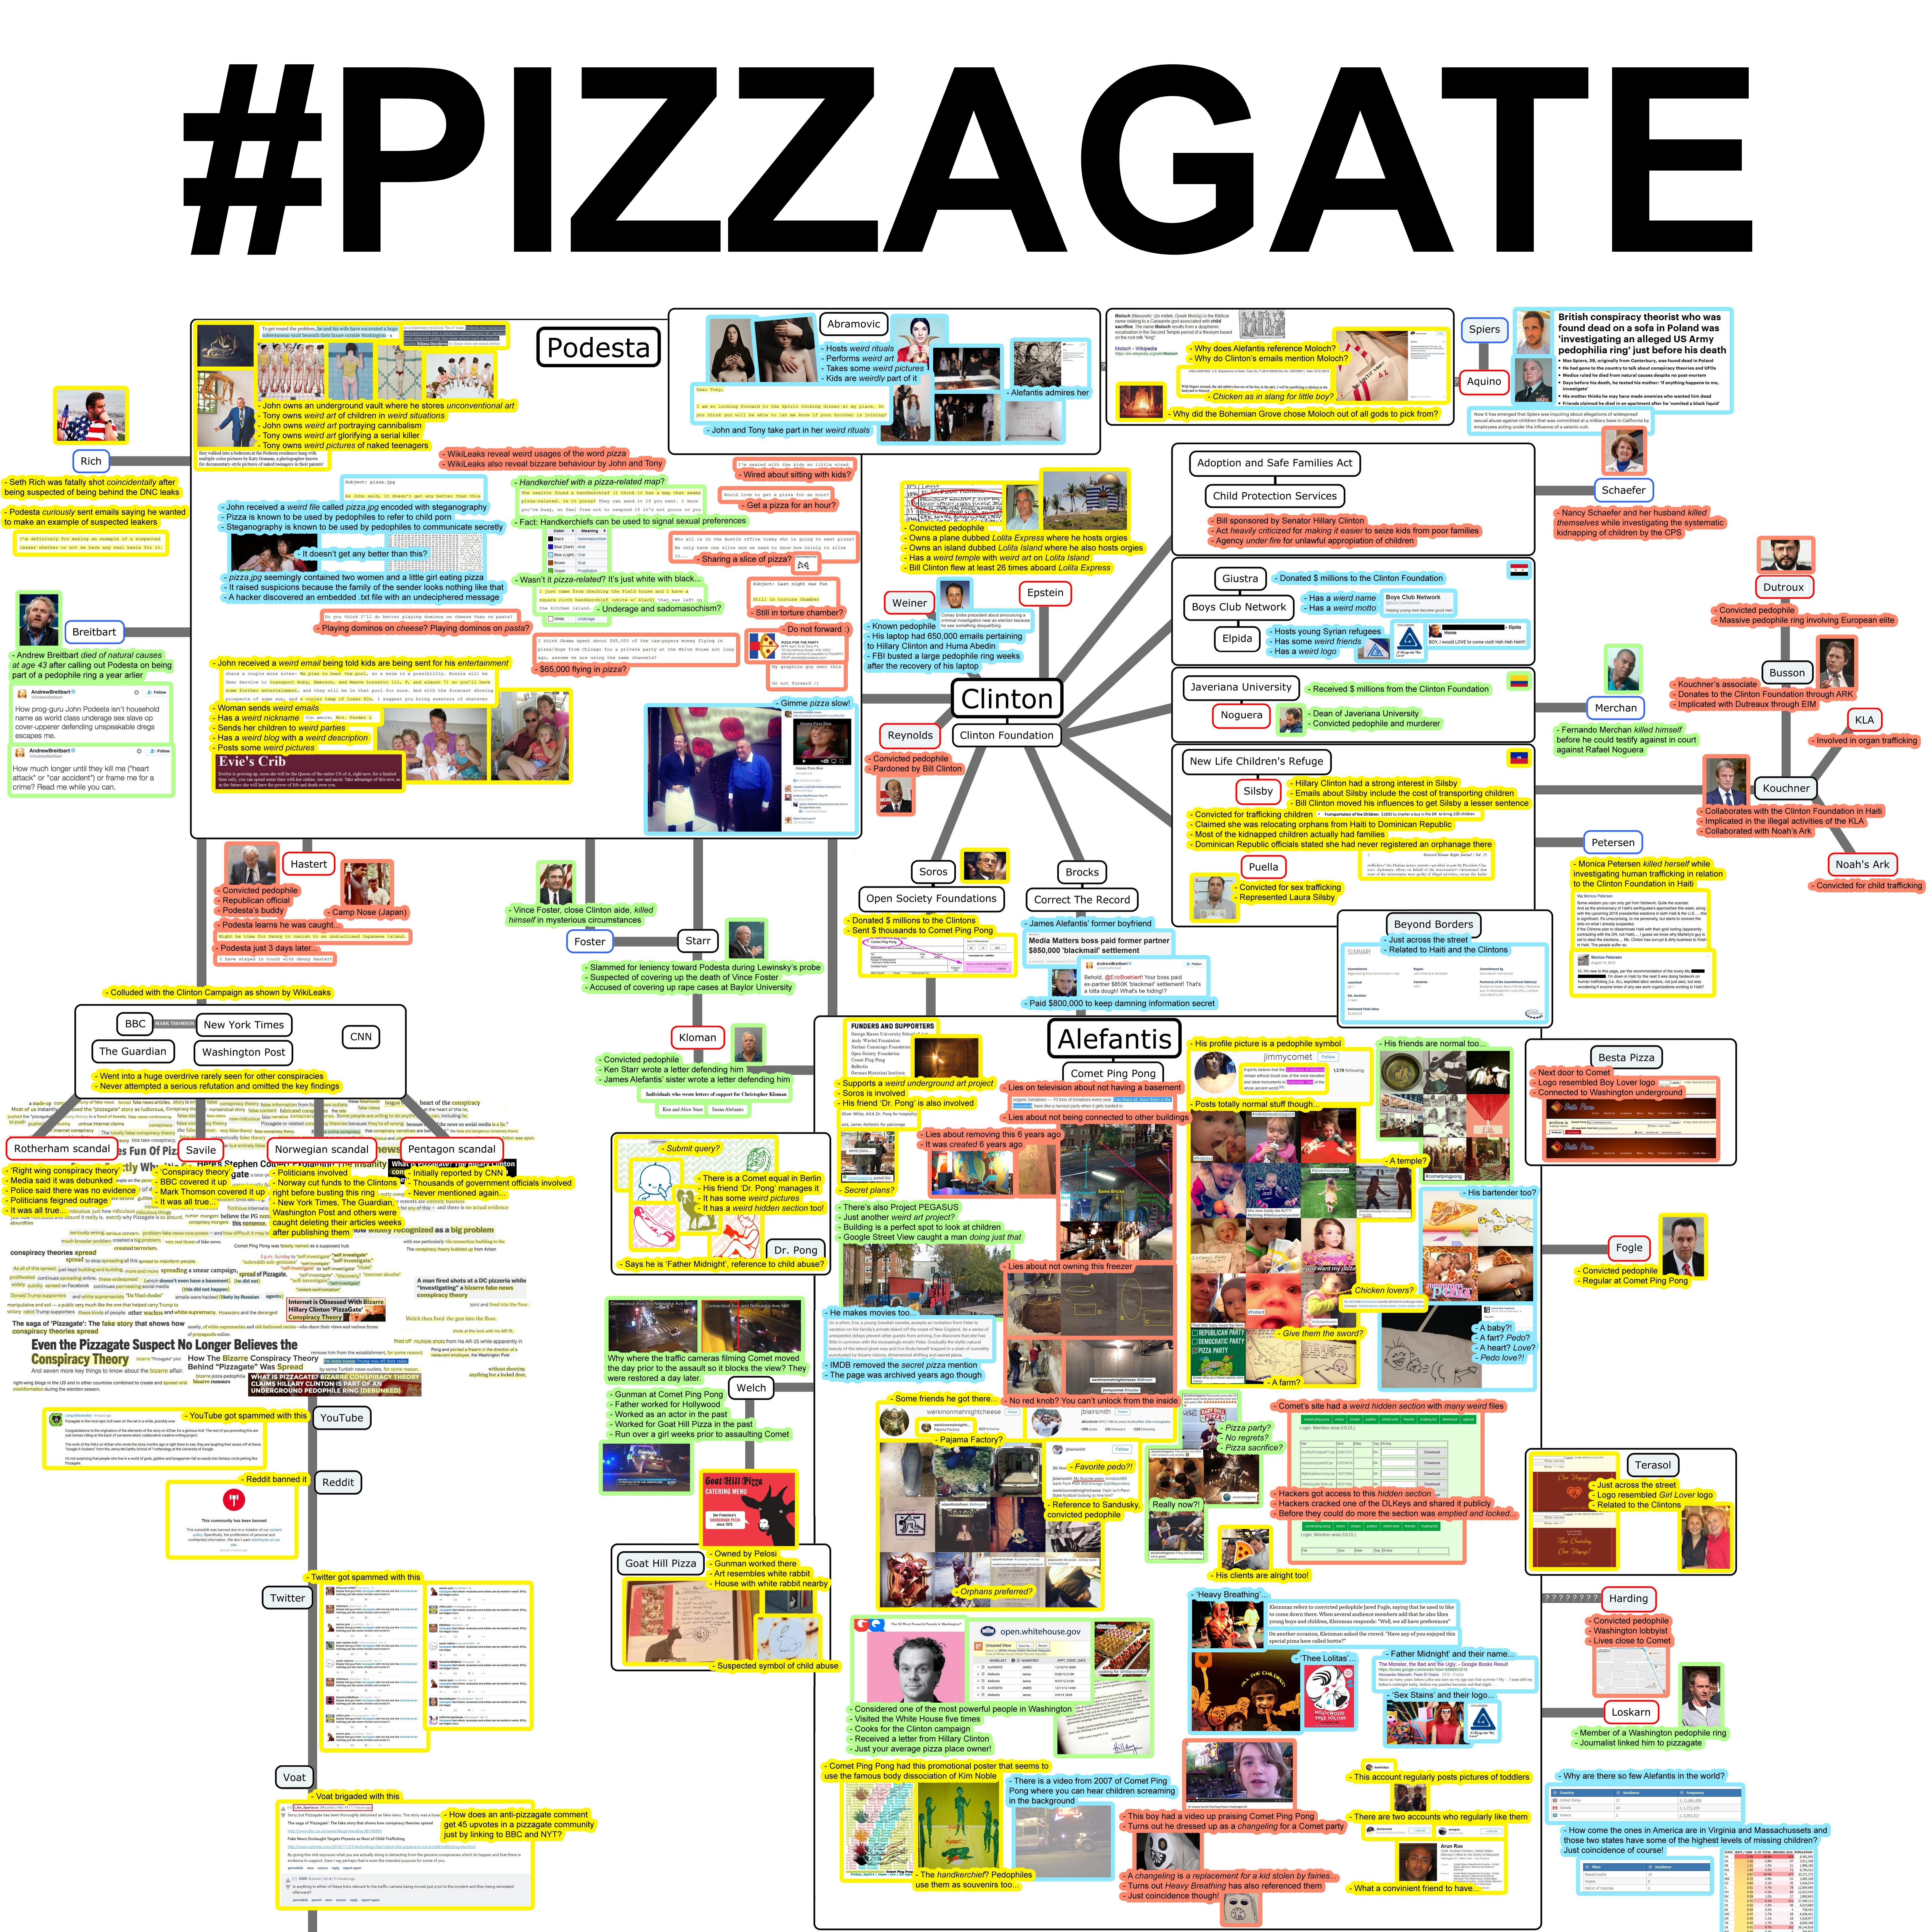 [Image: complete-pizzagate-connections.jpeg]